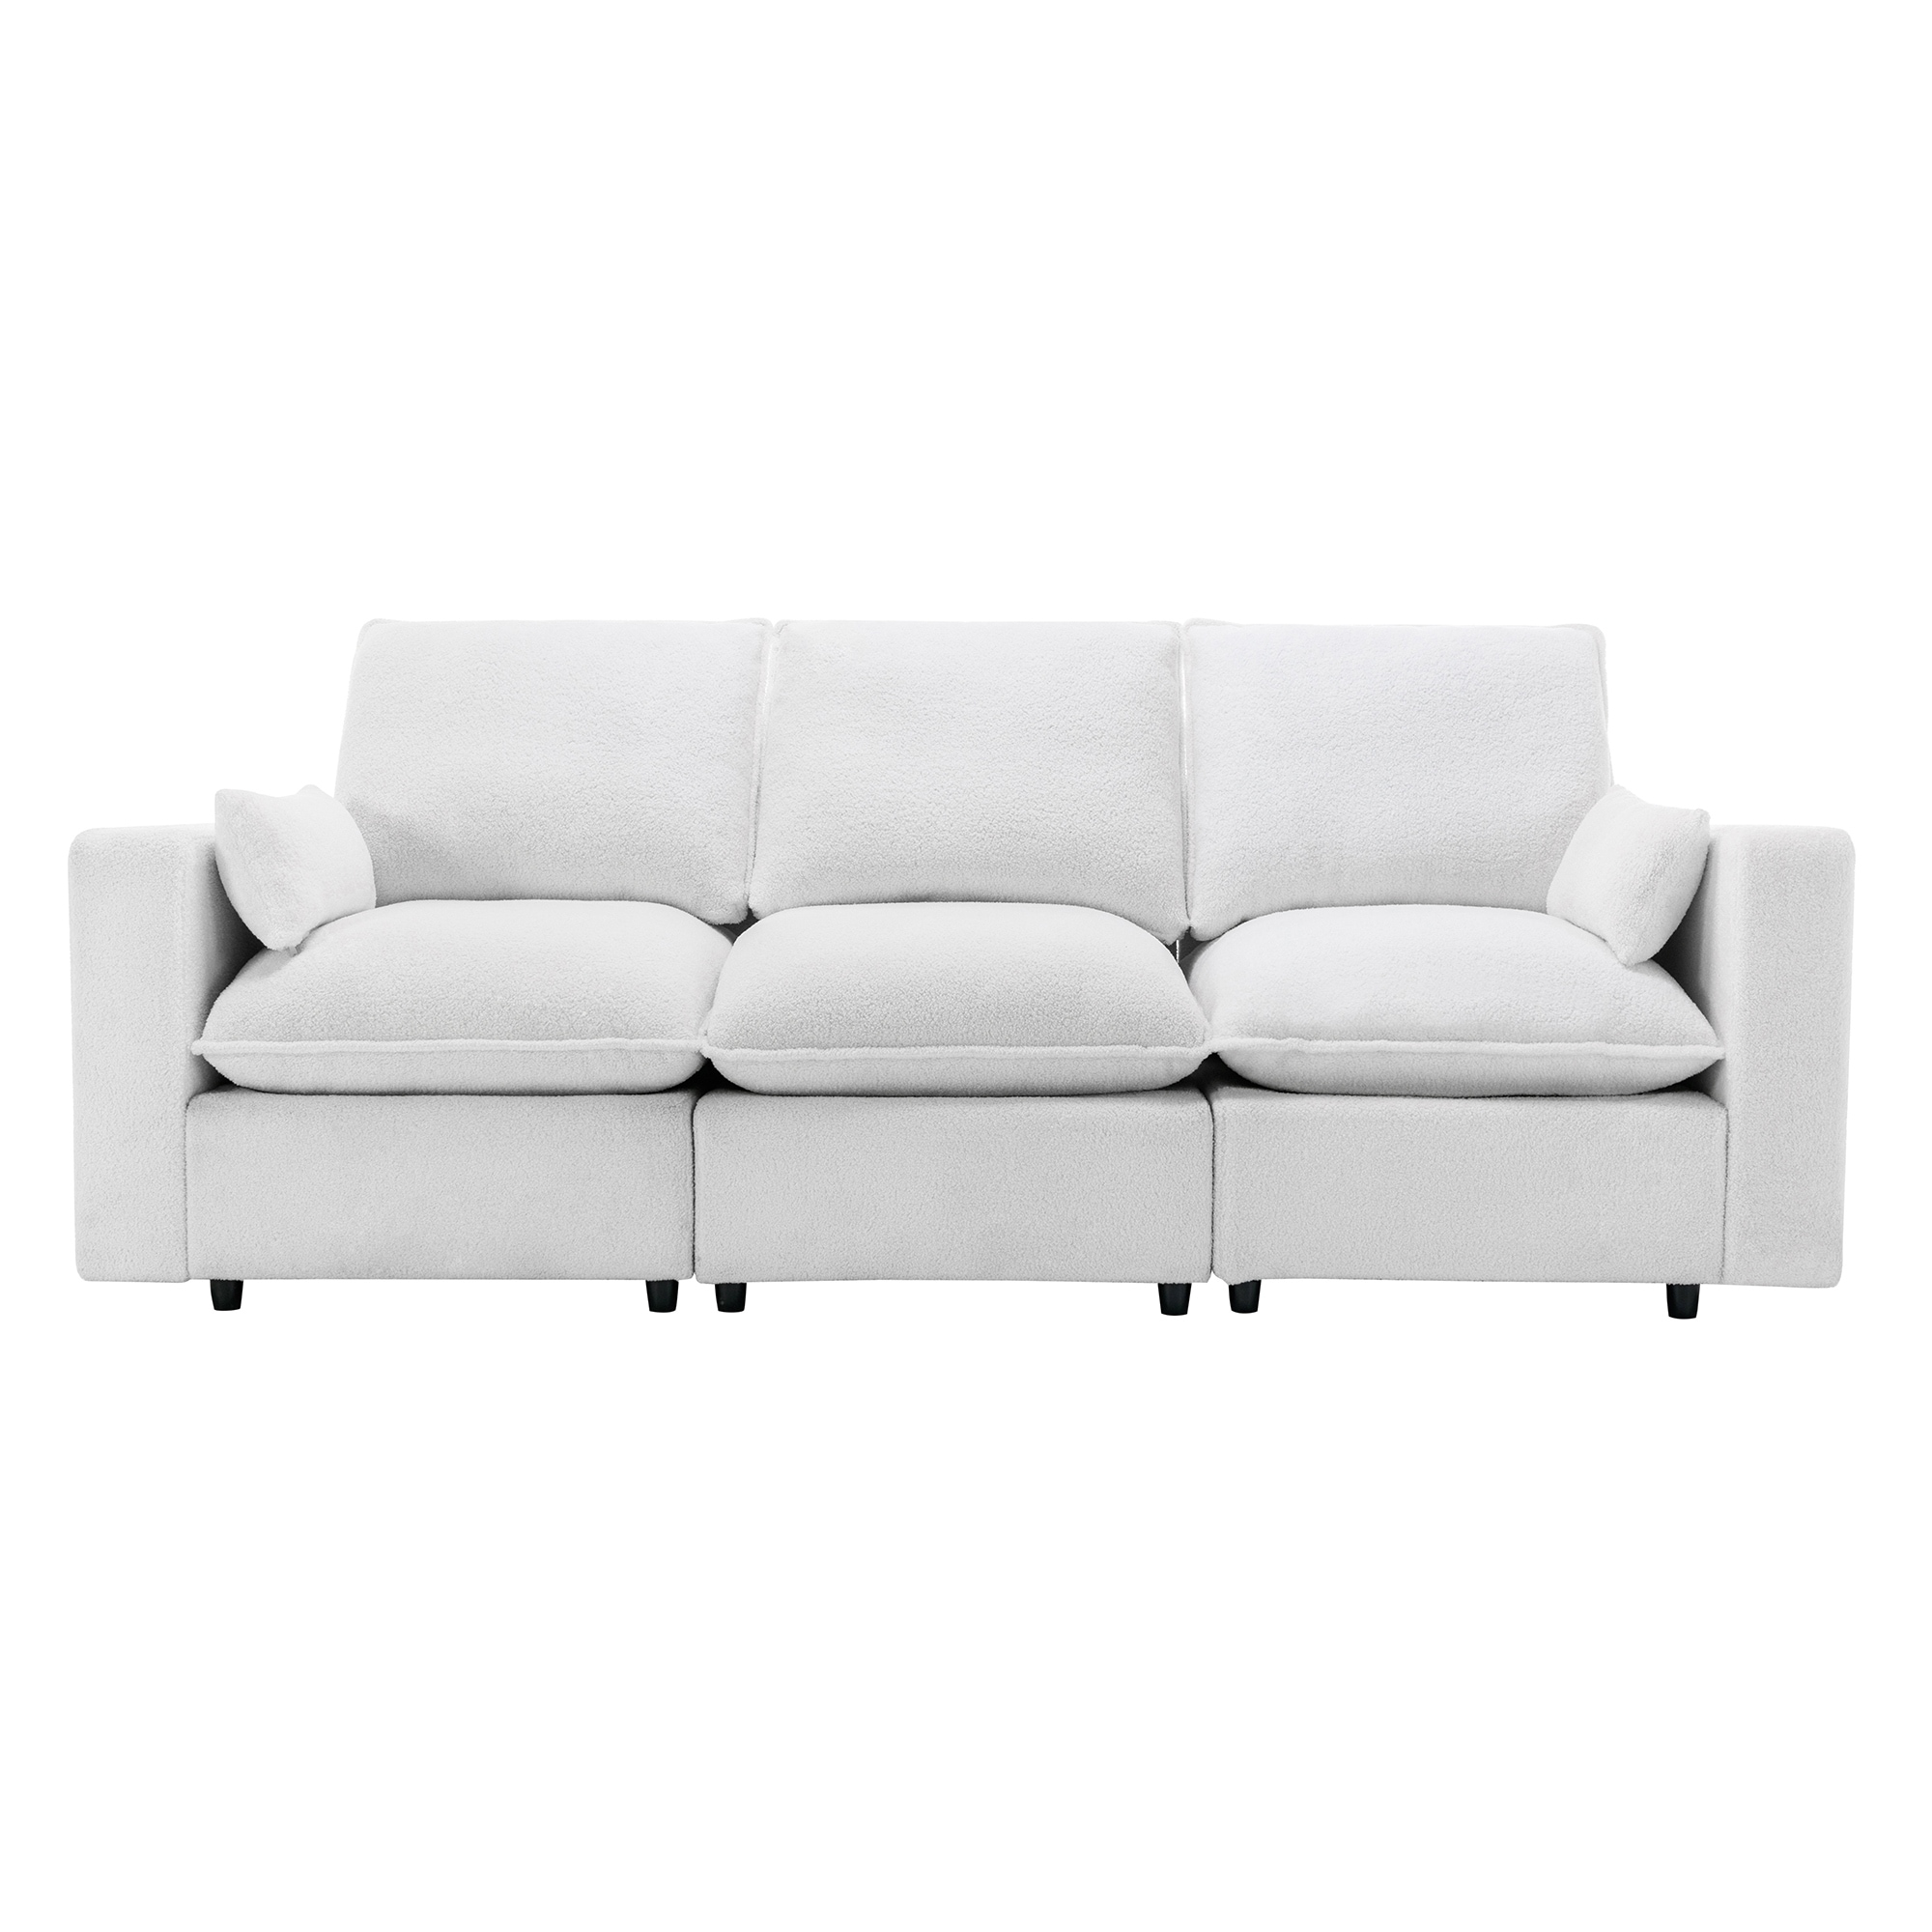 https://ak1.ostkcdn.com/images/products/is/images/direct/94927a272334c54eef662eabd9a872f20812db01/Loveseat-with-Removable-Back-and-Seat-Cushions-Teddy-Fabric-Sofa-Couch-with-2-Pillows-for-Living-Room-Office-Apartment.jpg